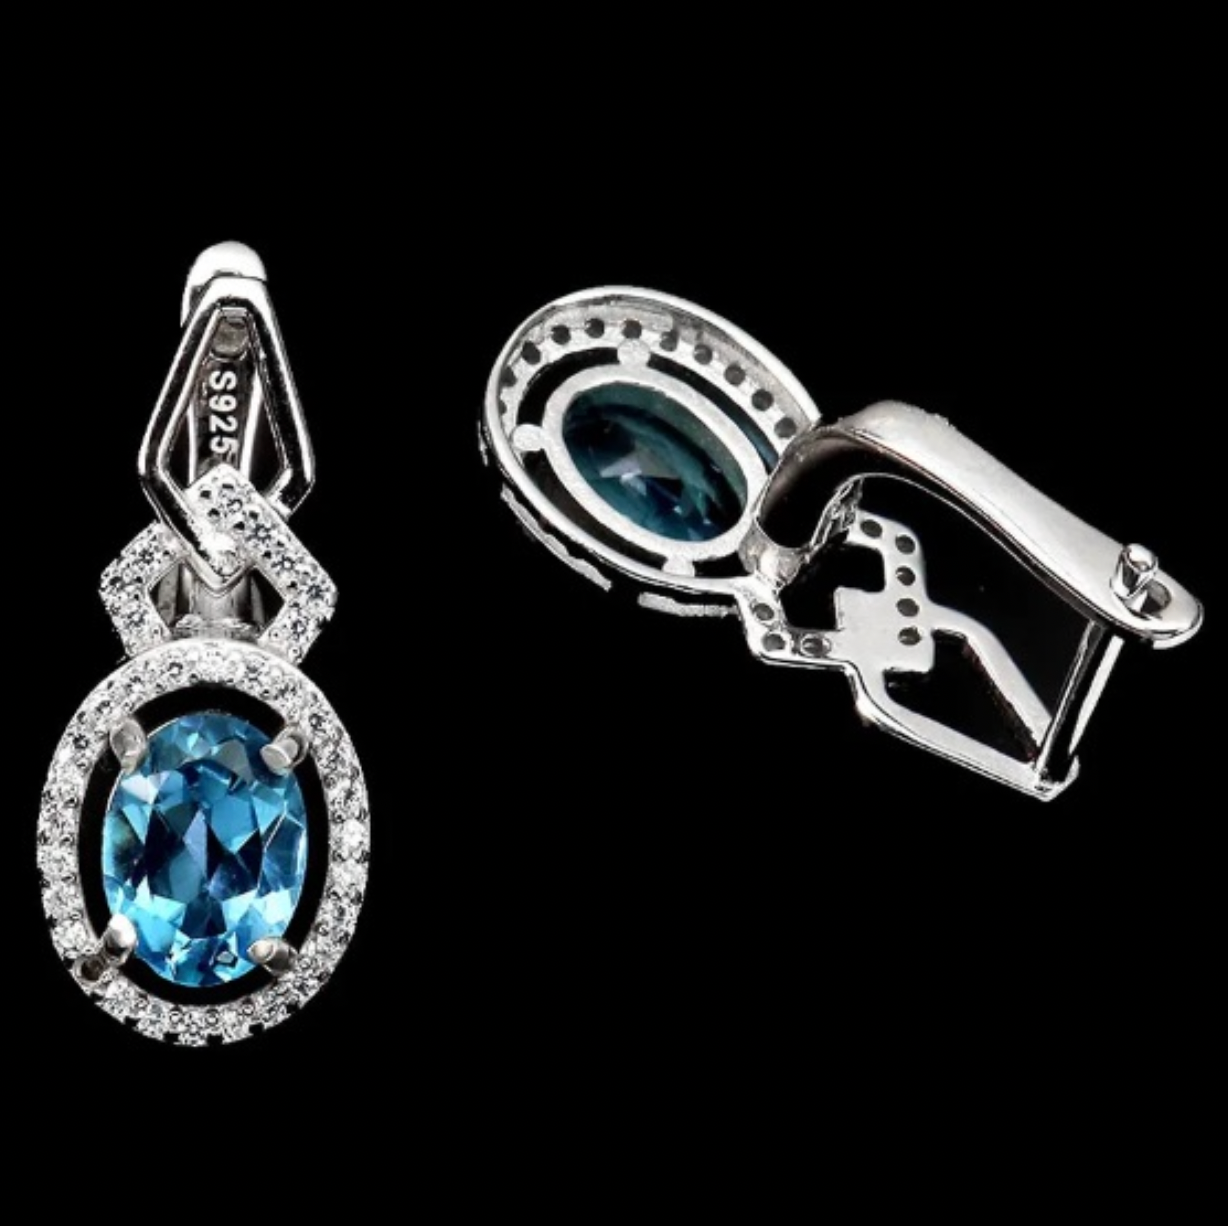 Natural Swiss Blue Topaz White Cubic Zirconia Solid .925 Sterling Silver 14K White Gold Earrings - BELLADONNA